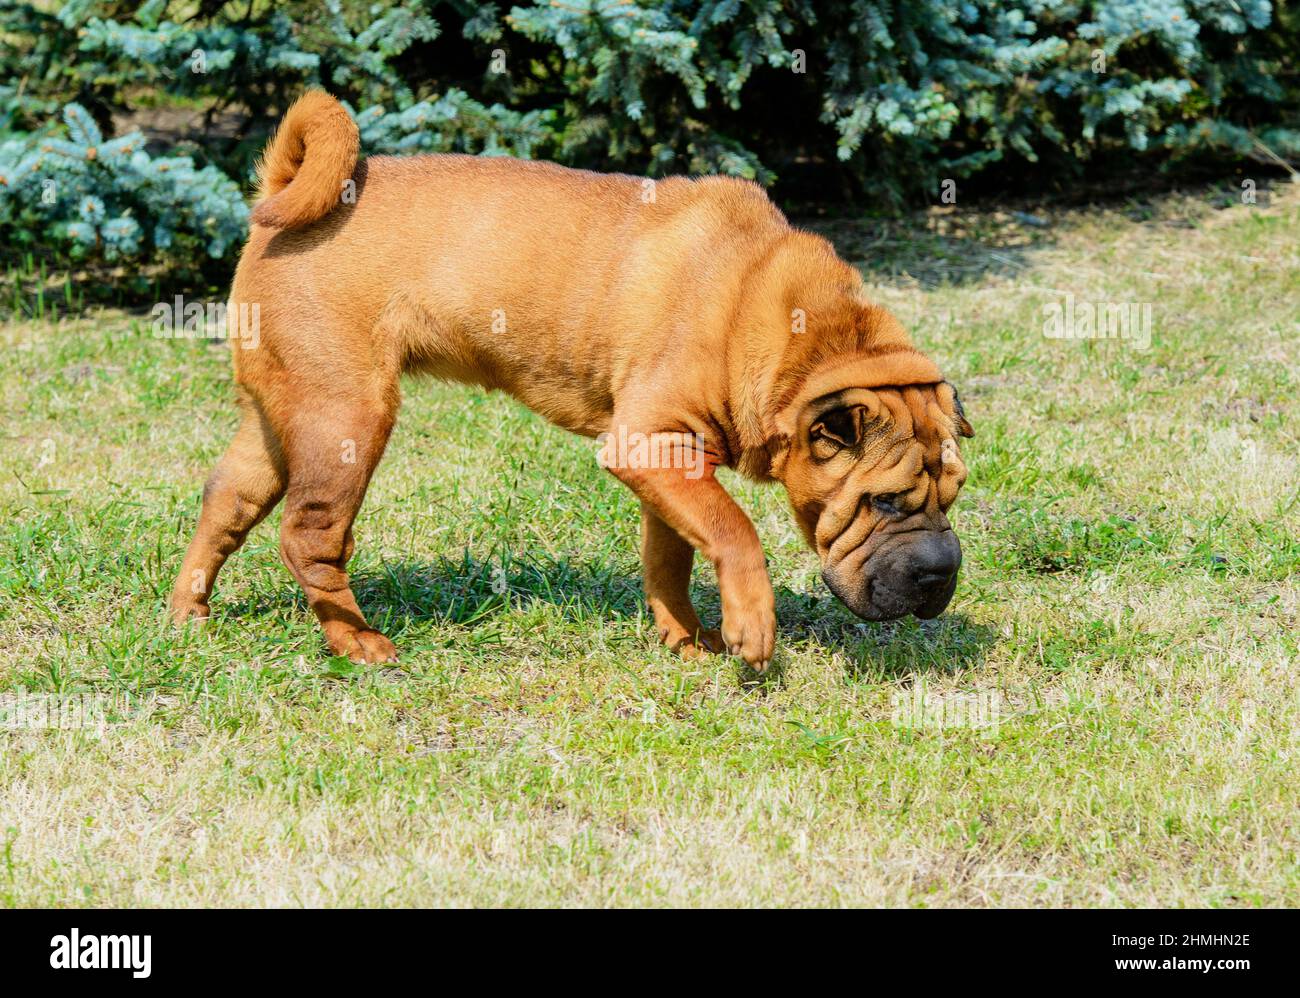 Shar-Pei dog. The Shar-Pei dog is on the grass in the park. Stock Photo